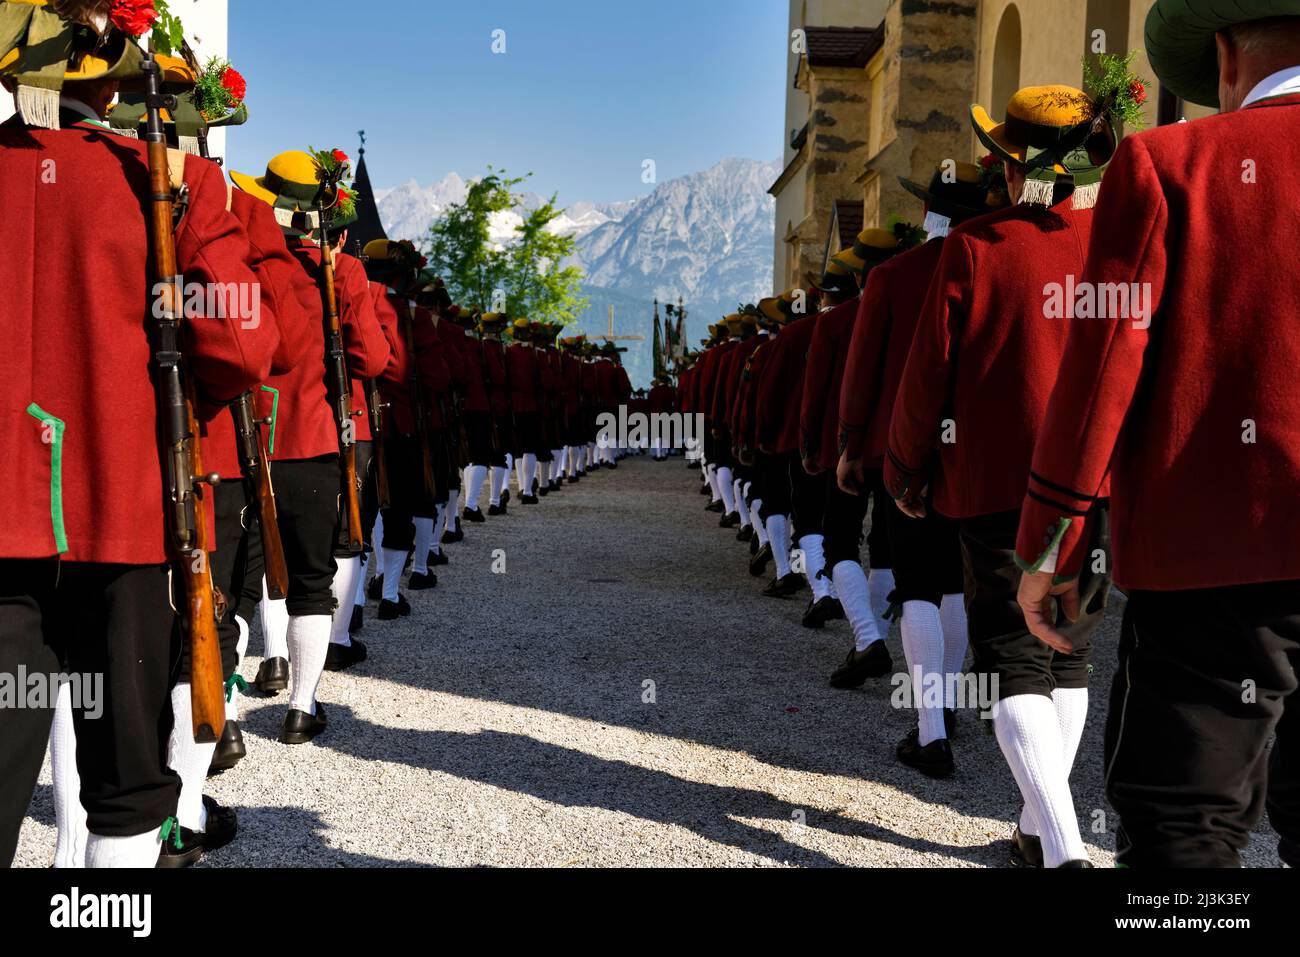 Lining up outside the Mary Immaculate parish church in Weerberg village, with the Karwendel mountain range in the background, local people of the area Stock Photo